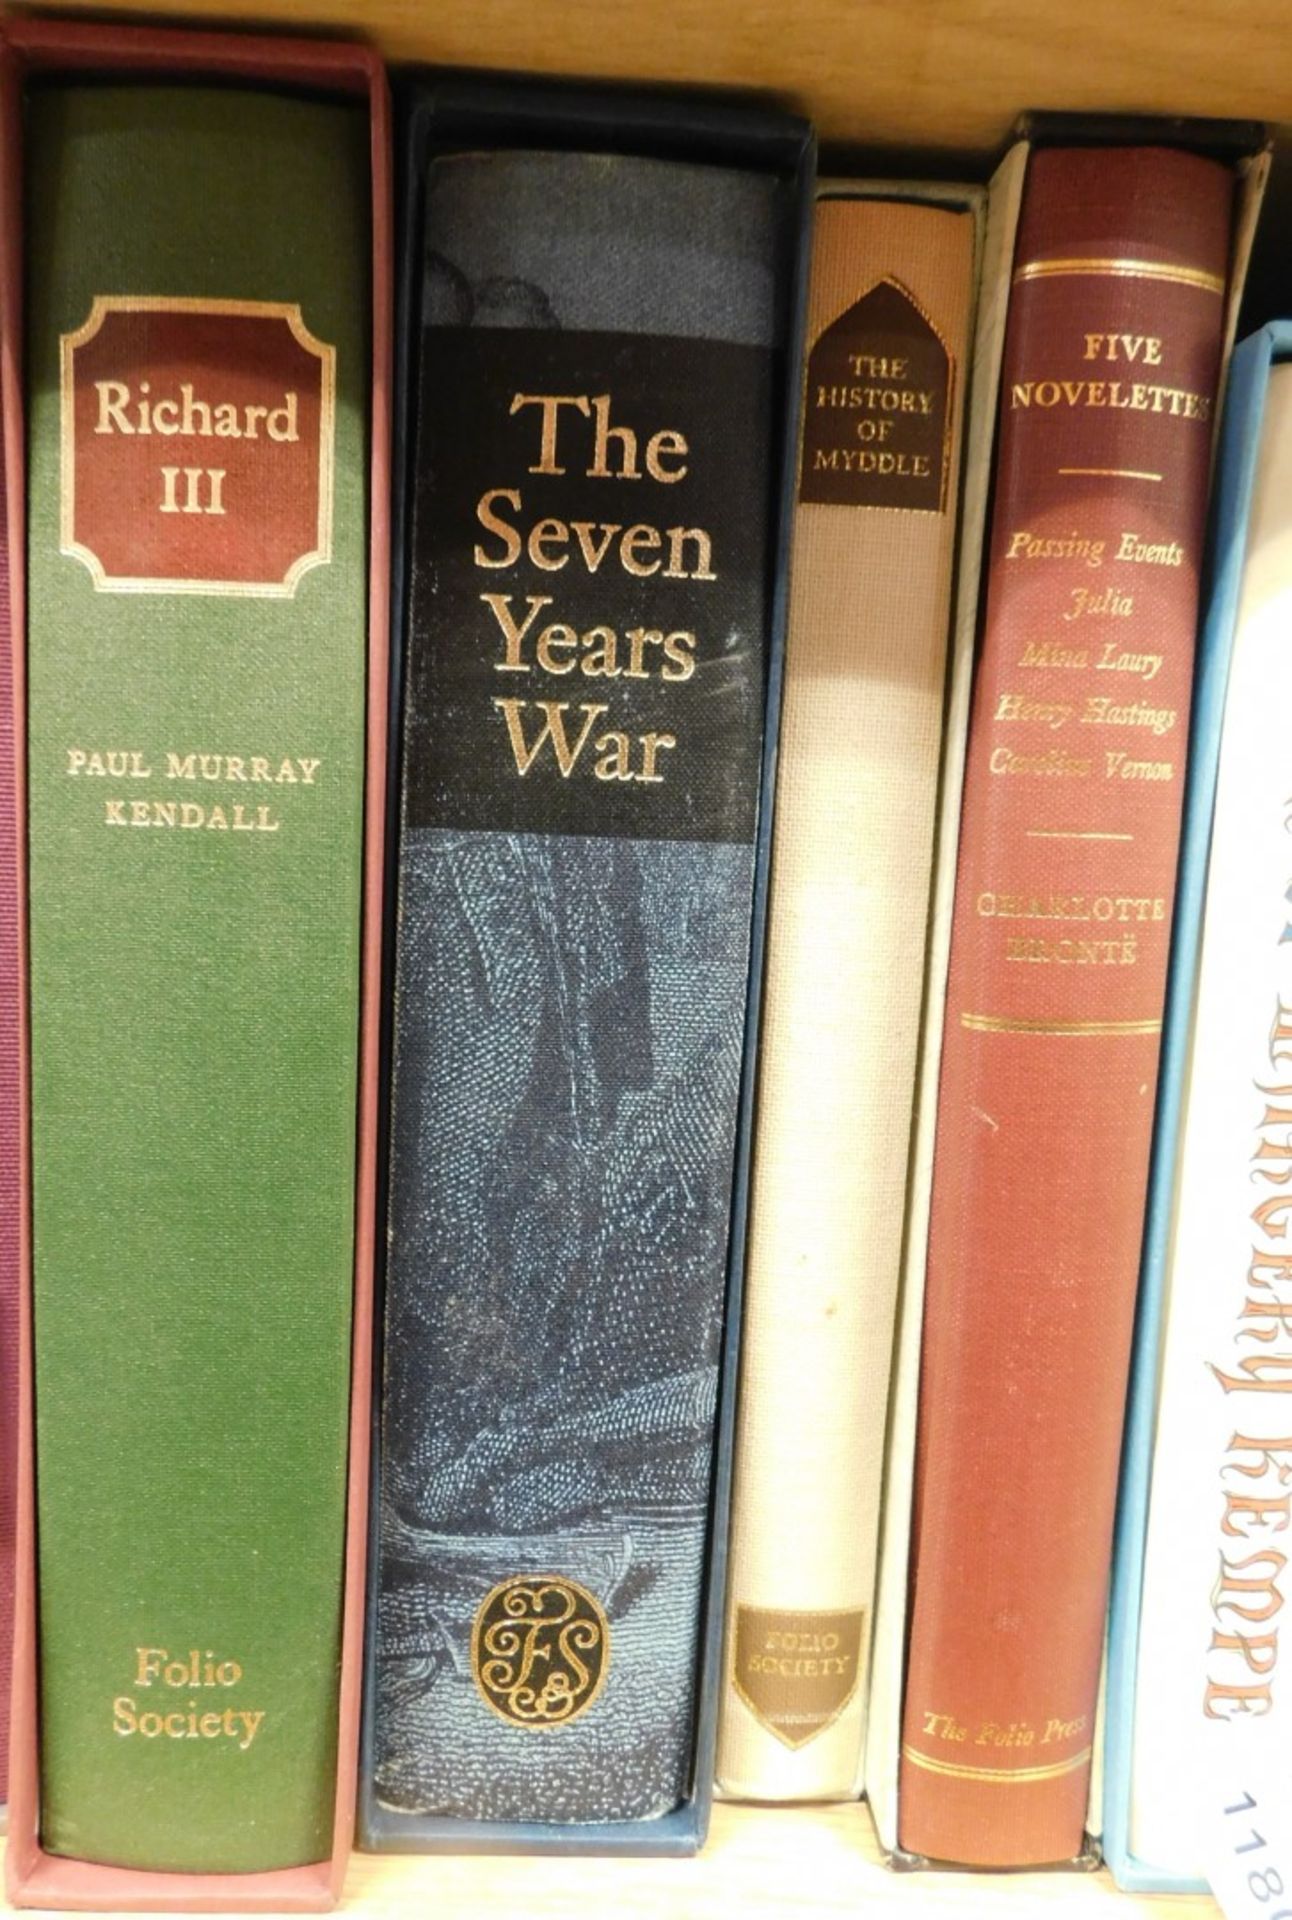 Various Folio Society books, Kendall (Paul Murray) Richard III, The Seven Years War, The History of